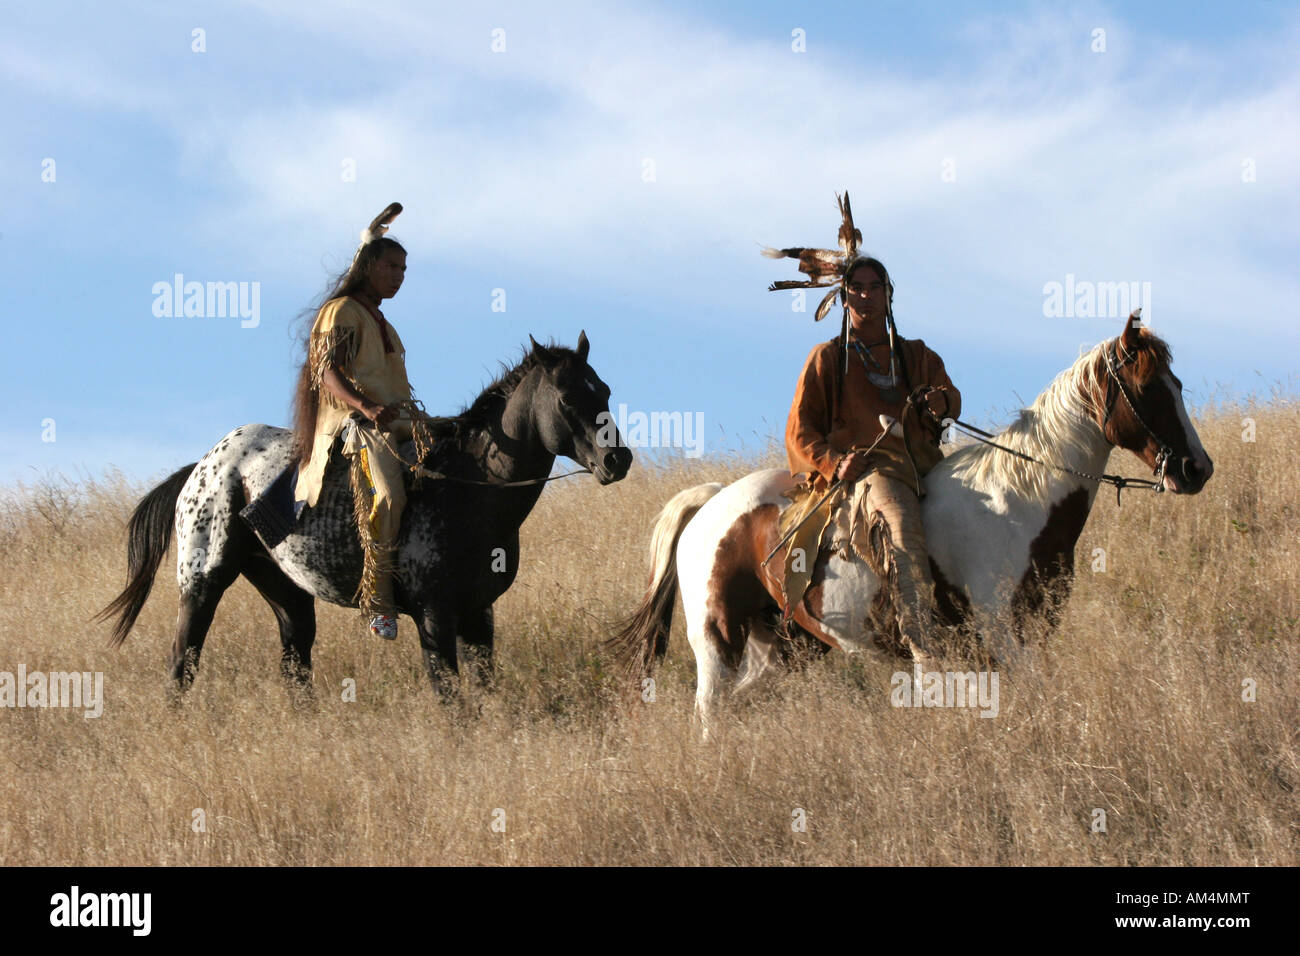 Two Native American Indian men on horseback scouting for enemies or ...